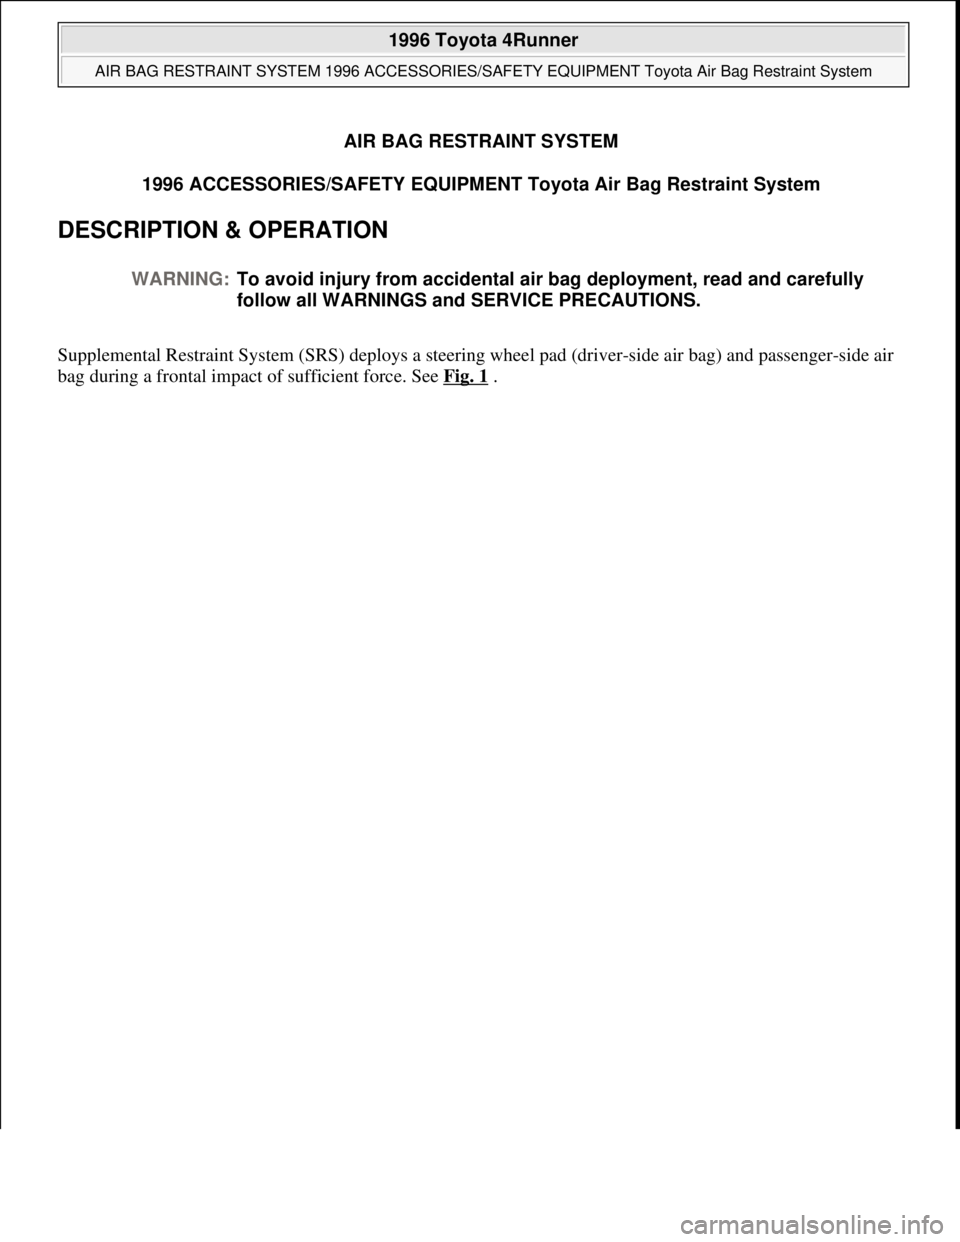 TOYOTA RAV4 1996  Service Repair Manual AIR BAG RESTRAINT SYSTEM
1996 ACCESSORIES/SAFETY EQUIPMENT Toyota Air Bag Restraint System 
DESCRIPTION & OPERATION 
Supplemental Restraint System (SRS) deploys a steering wheel pad (driver-side air b